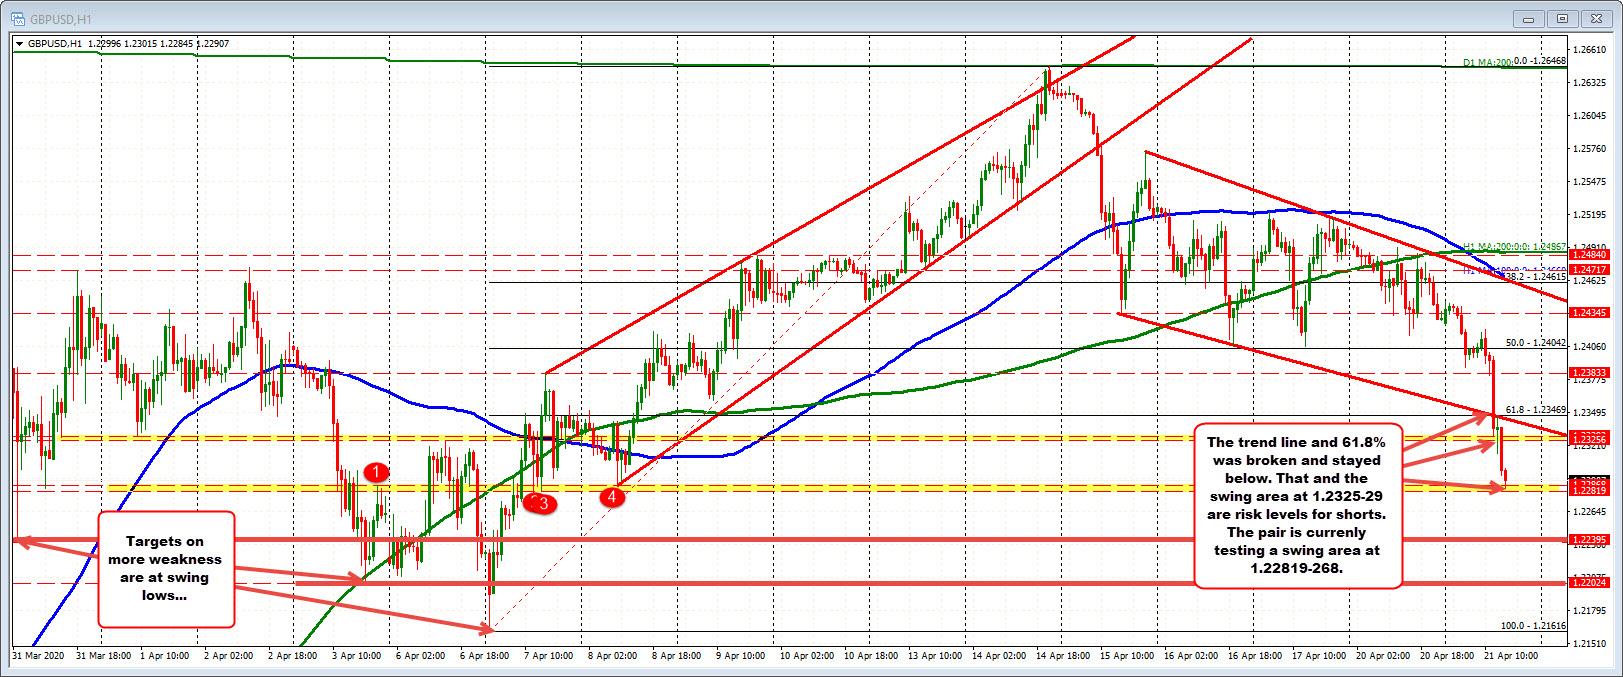 GBPUSD on the hourly chart 